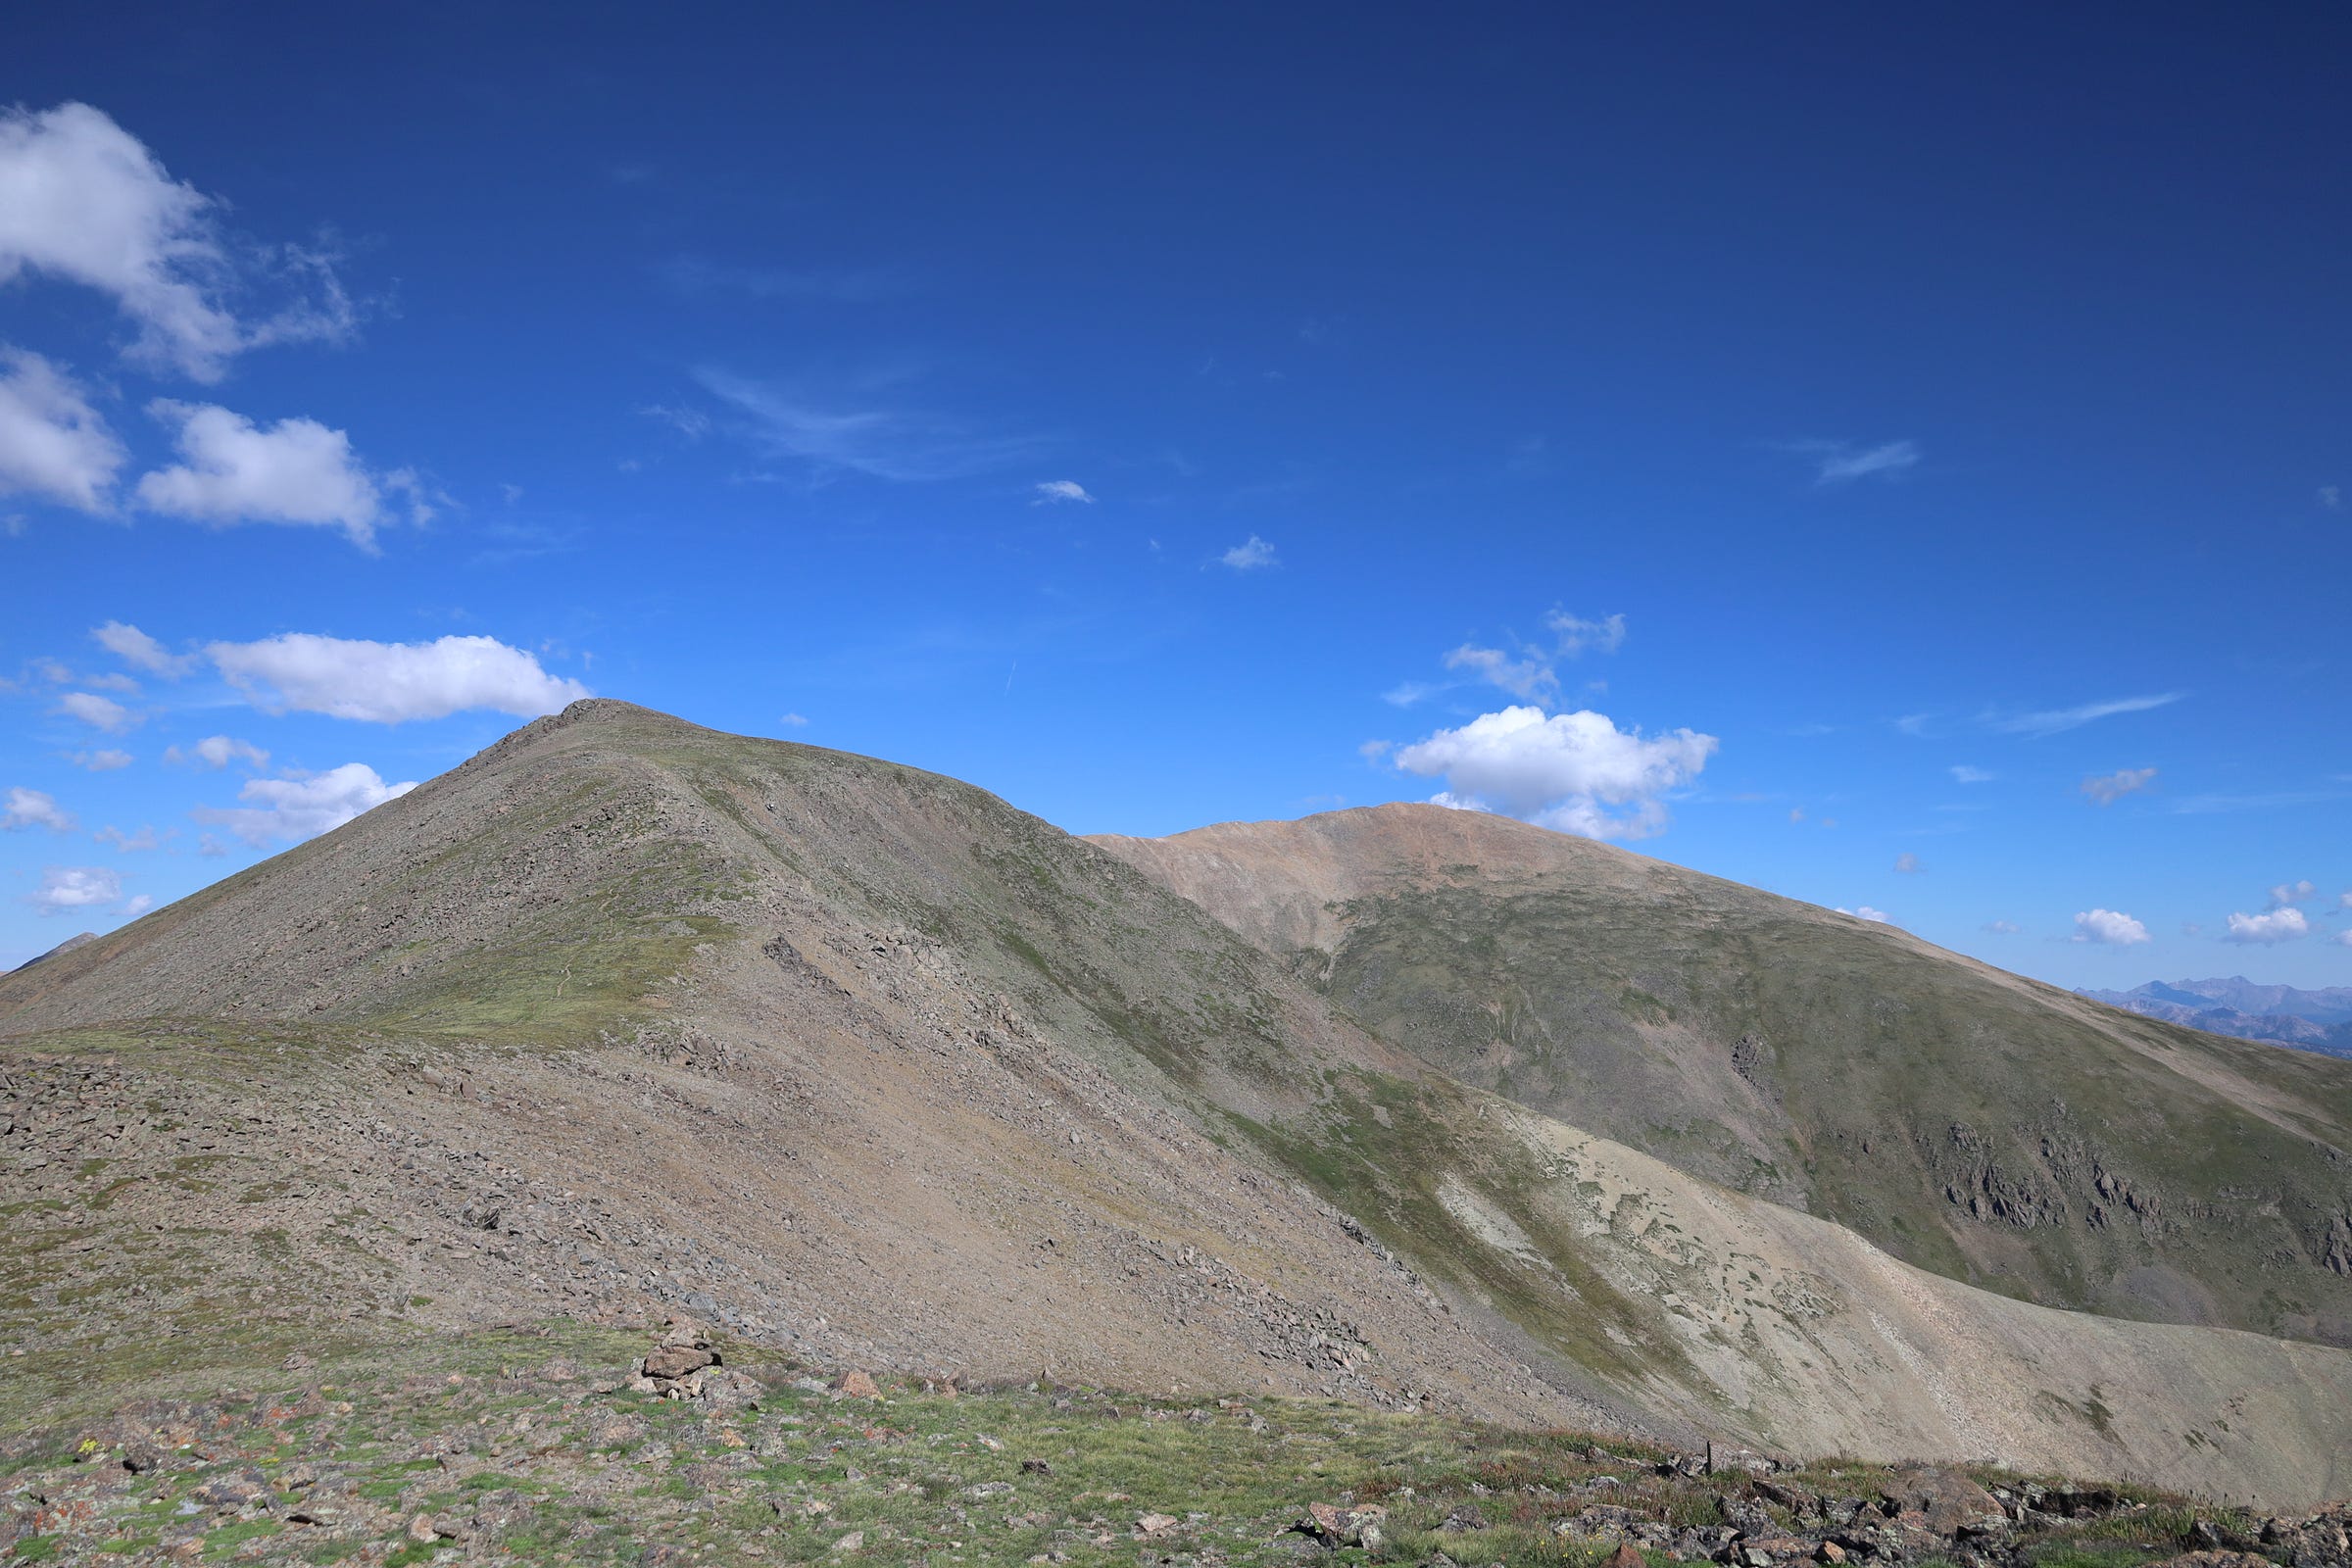 the ridgeline of elbert, with the true summit just visible to the right and behind the false one